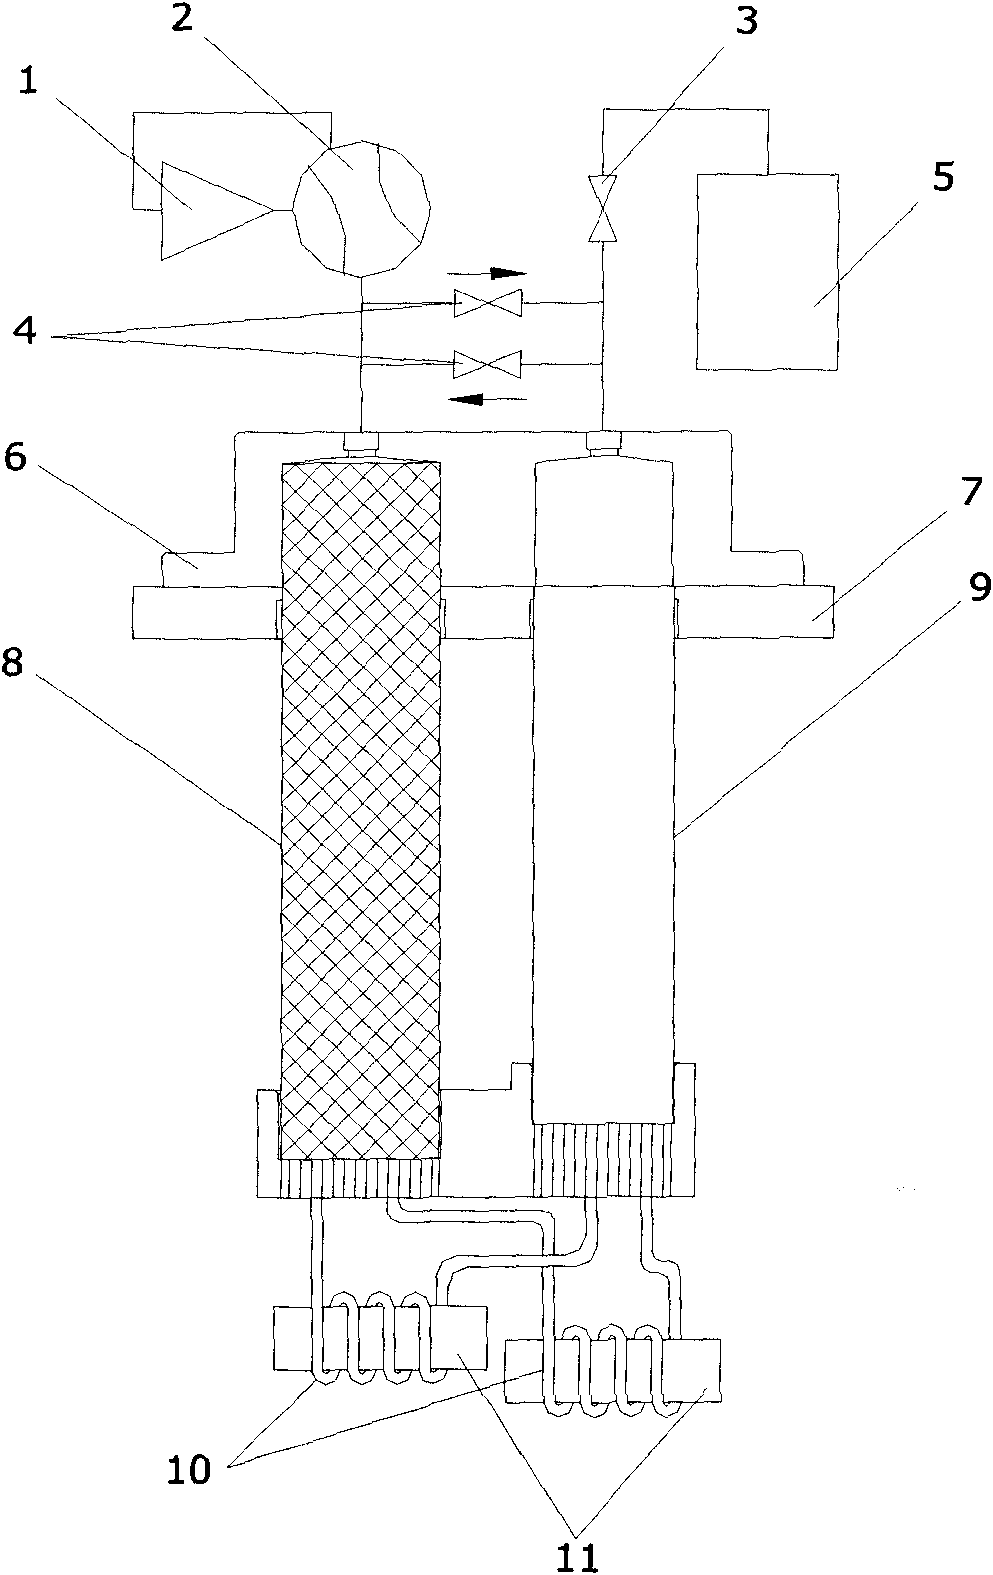 Object-oriented cooling device based on pulse tube refrigerator